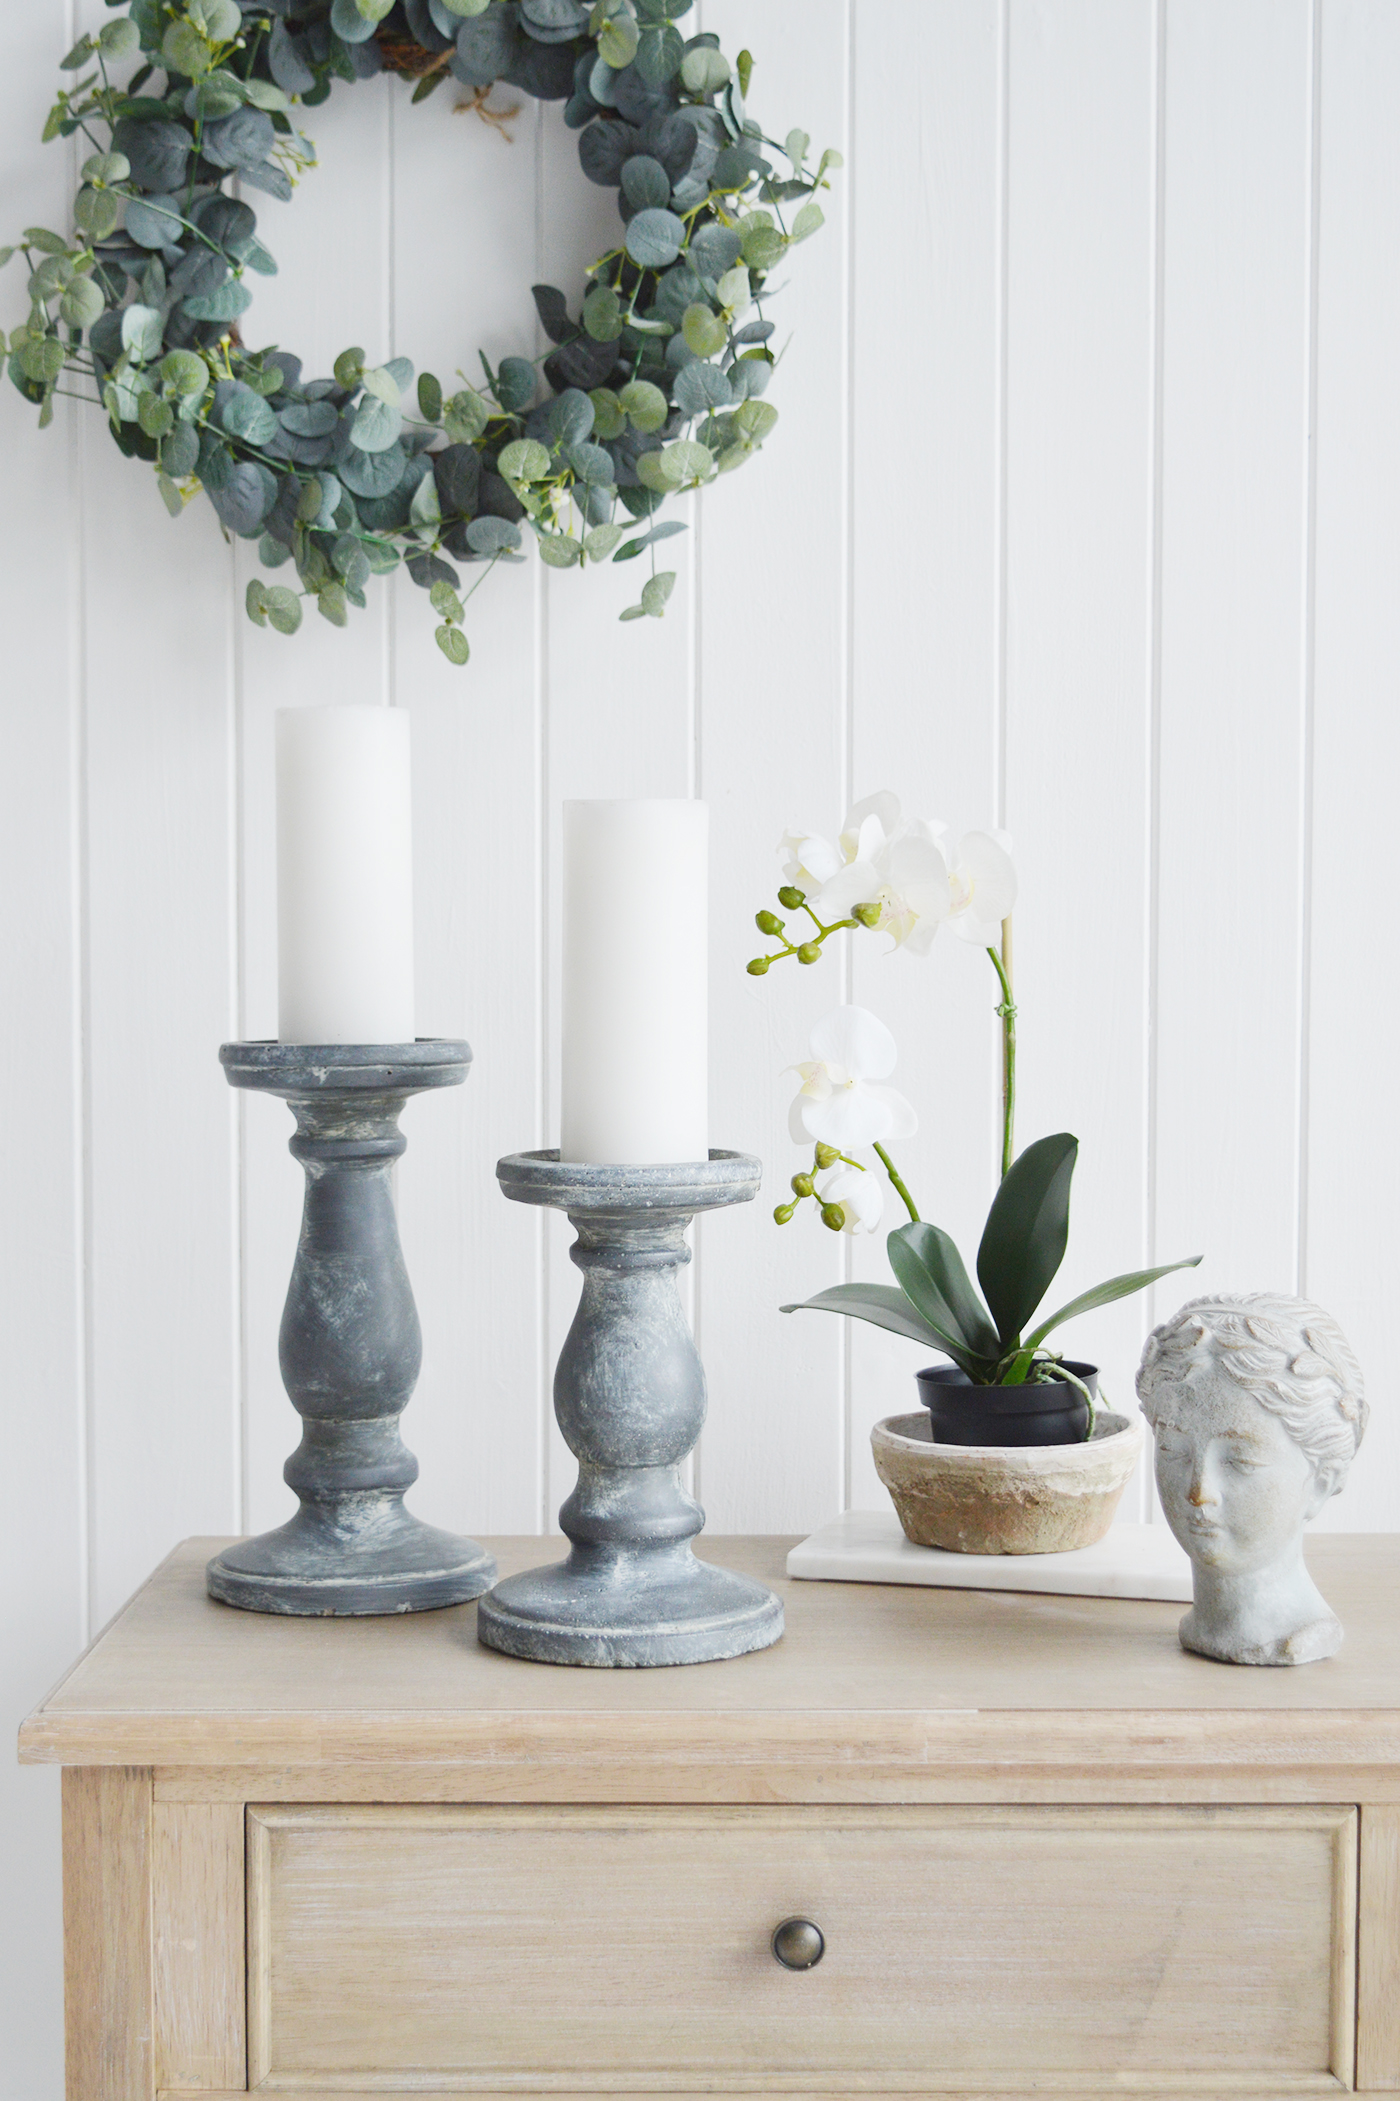 Console table styling - Candle holders, along with an artificial white Orchid, statue head, white marble tray, Eucalyptus wreath and vintage bowl